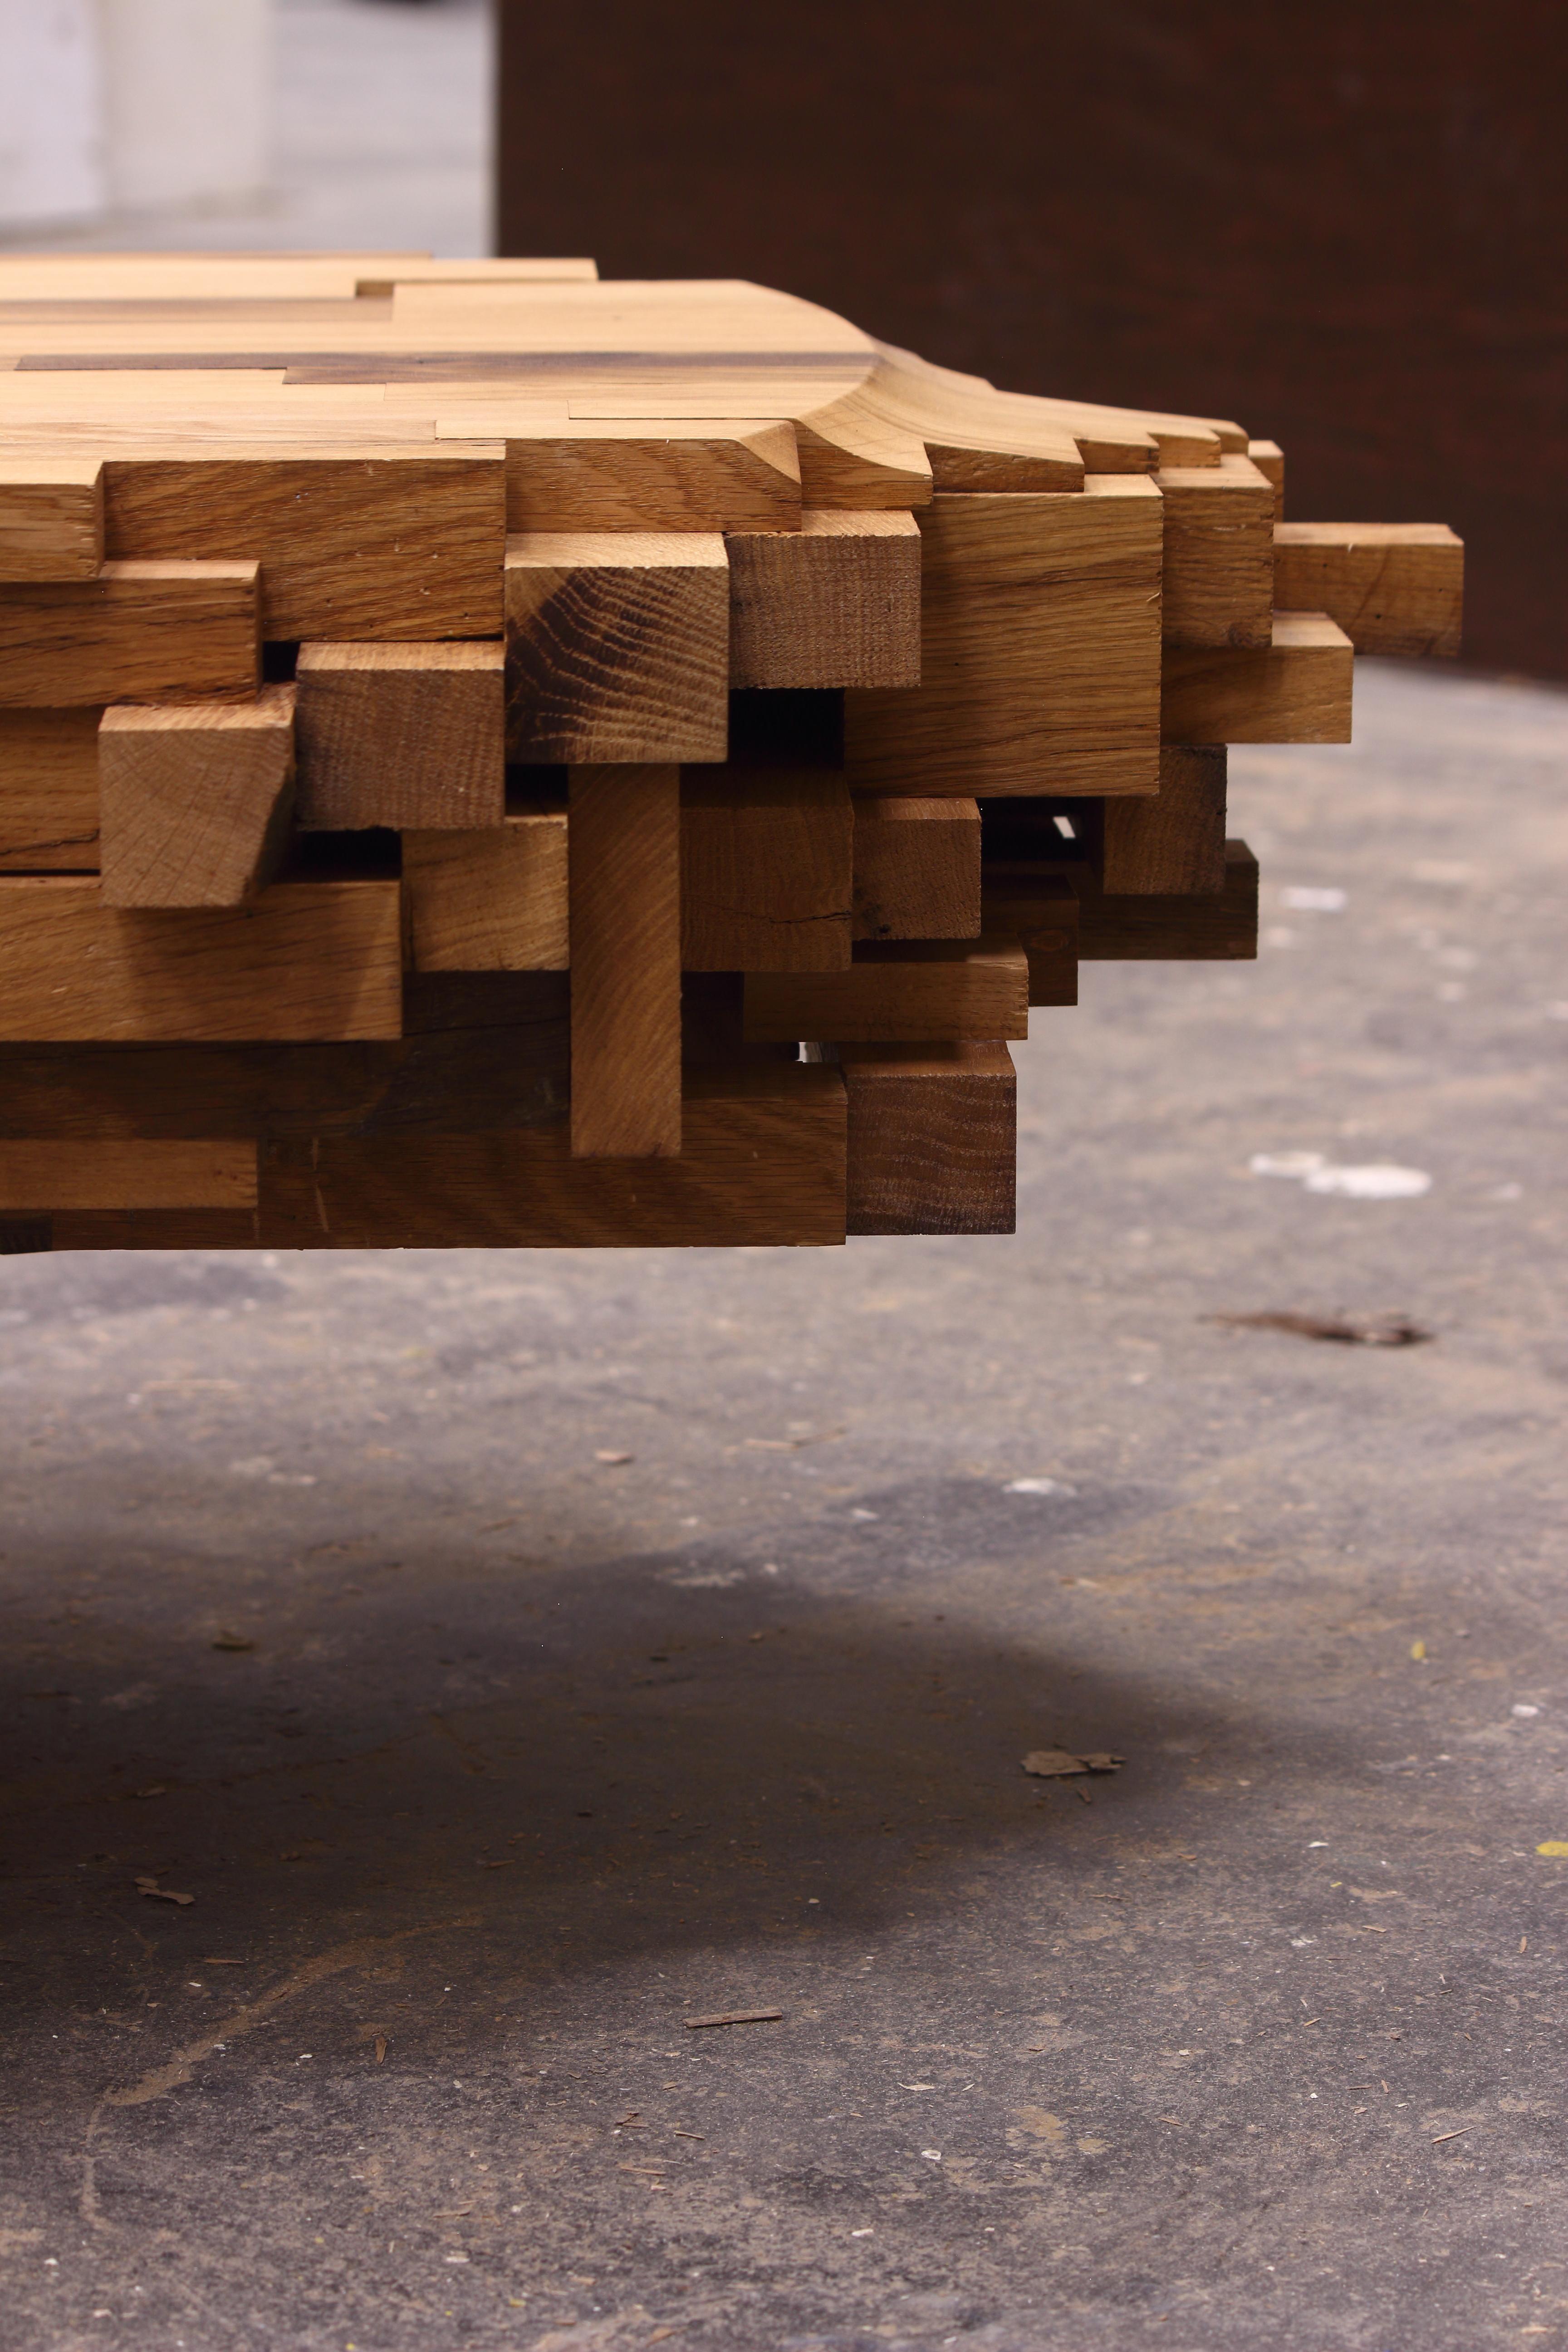 Japanese Sculptural Oak Wood Coffee Table Subterranean by Sho Ota In New Condition For Sale In Amsterdam, NL